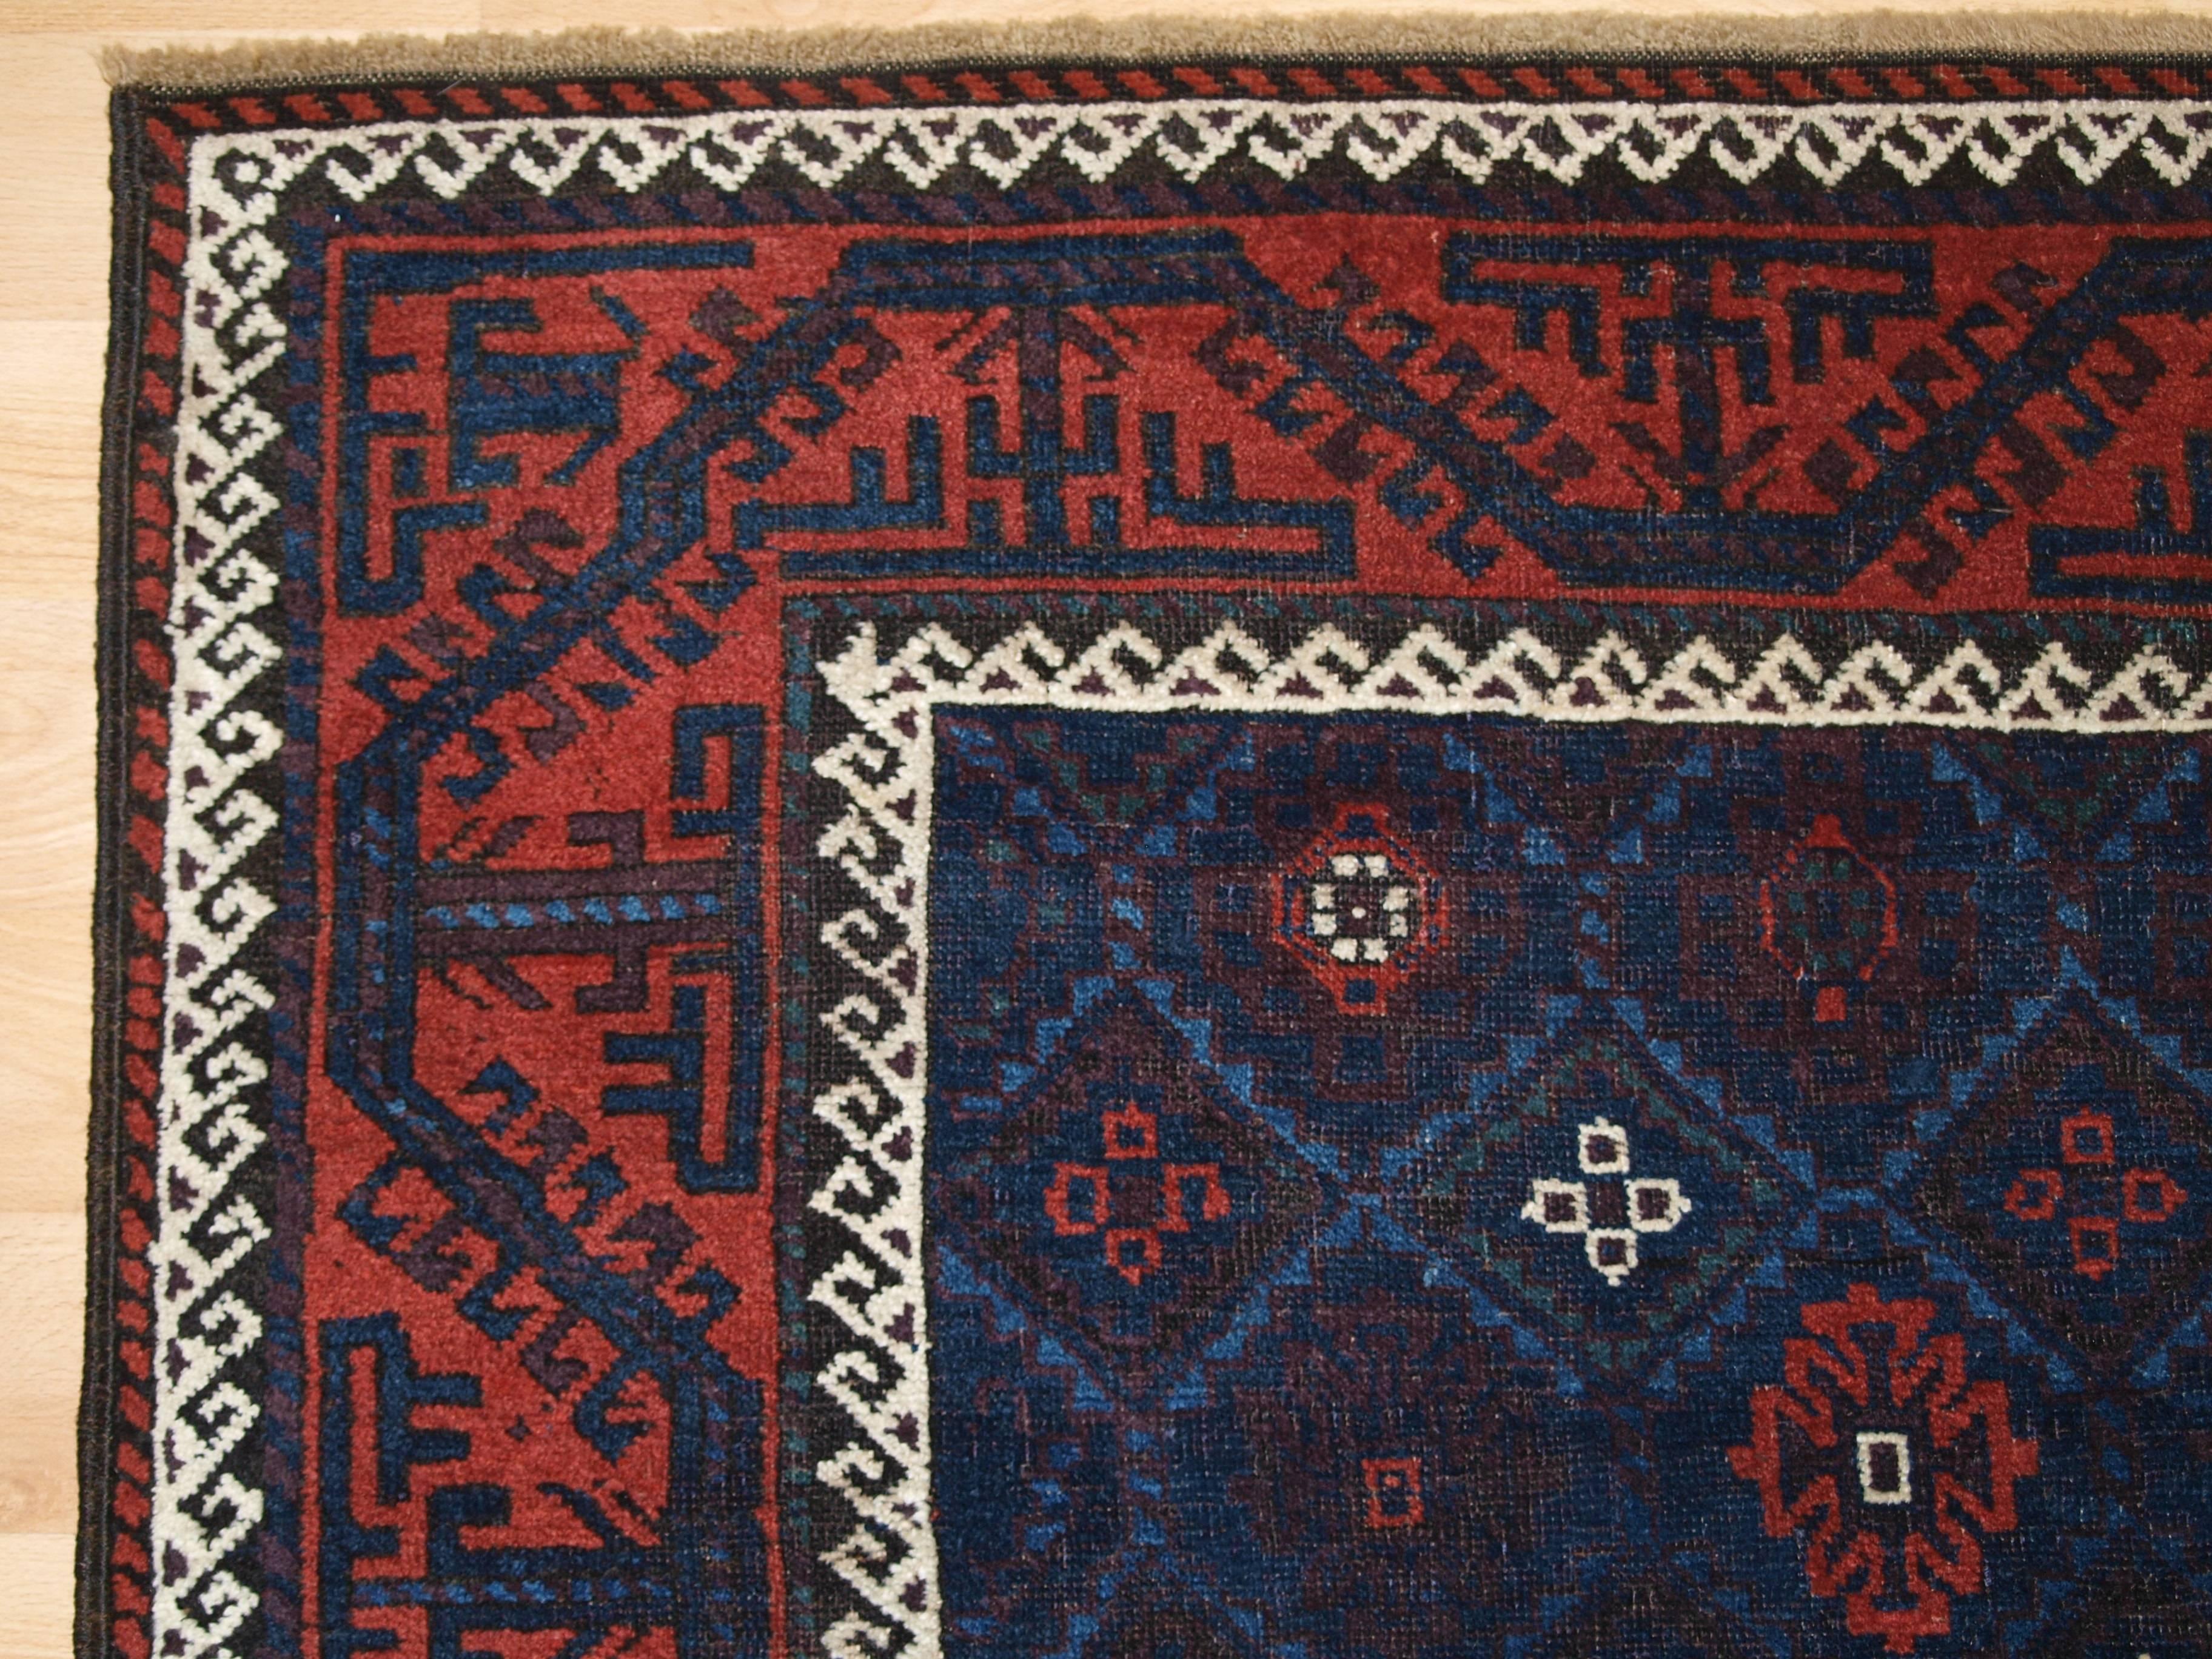 Antique Baluch Rug from Western Afghanistan or Eastern Persia In Excellent Condition For Sale In Moreton-in-Marsh, GB